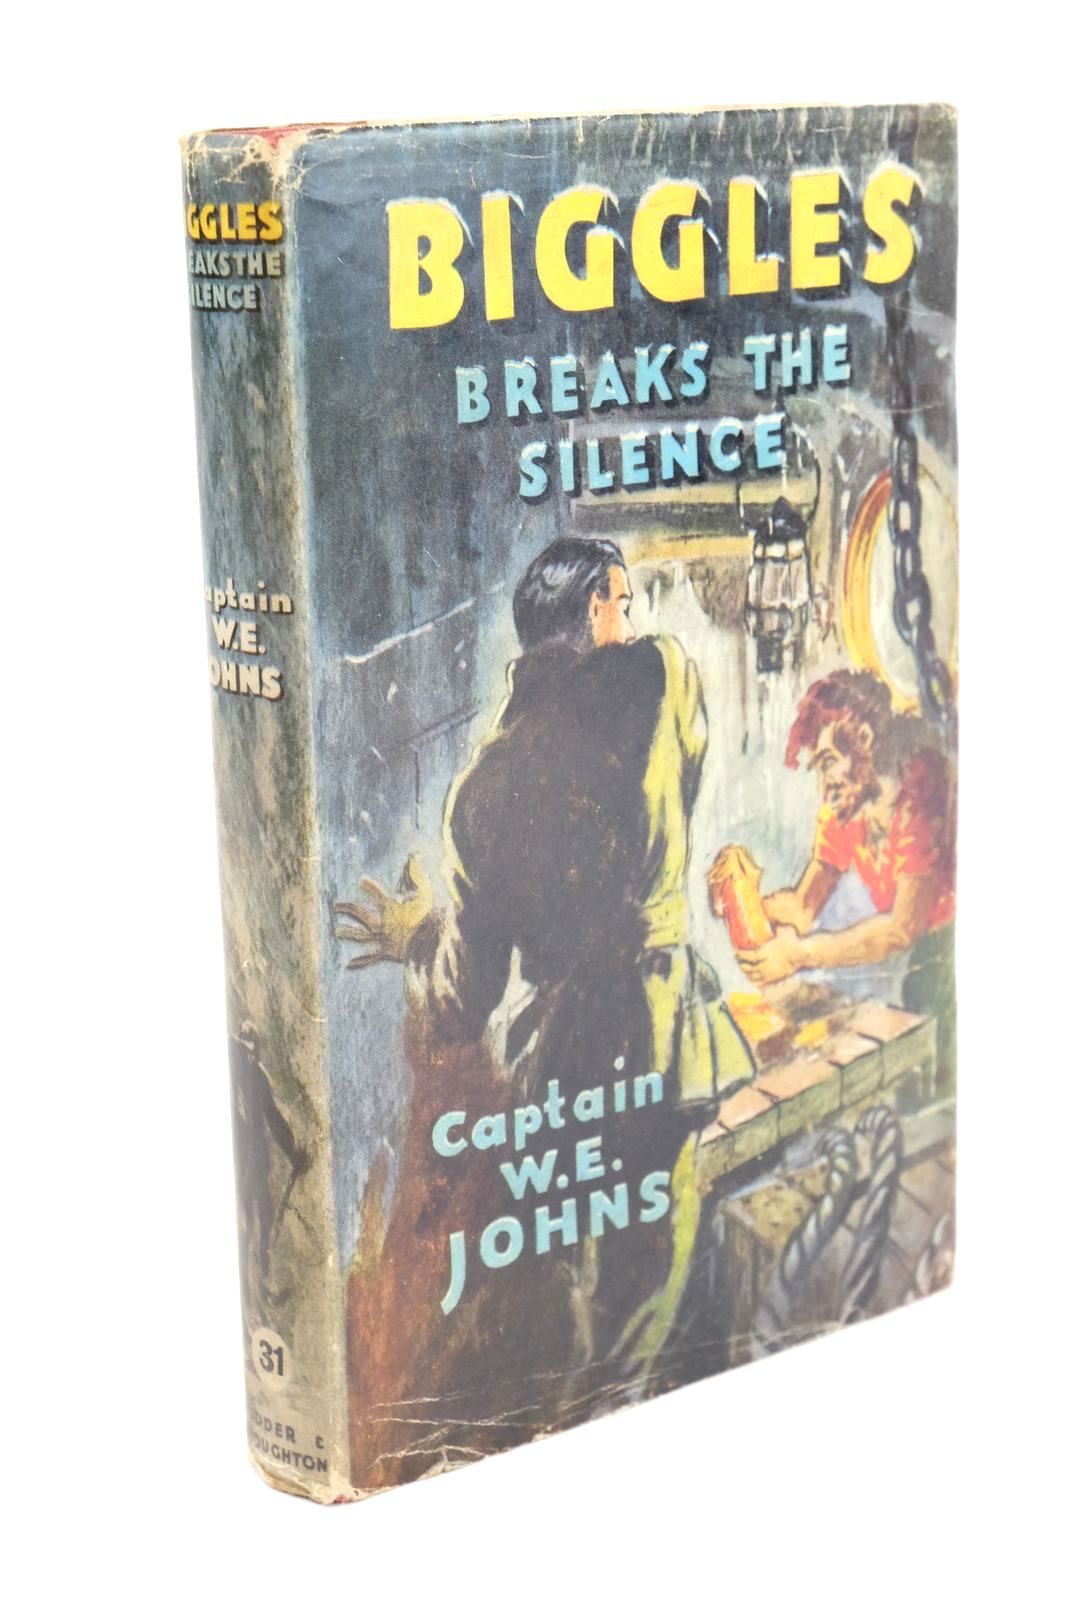 Photo of BIGGLES BREAKS THE SILENCE written by Johns, W.E. illustrated by Stead,  published by Hodder &amp; Stoughton (STOCK CODE: 1324857)  for sale by Stella & Rose's Books